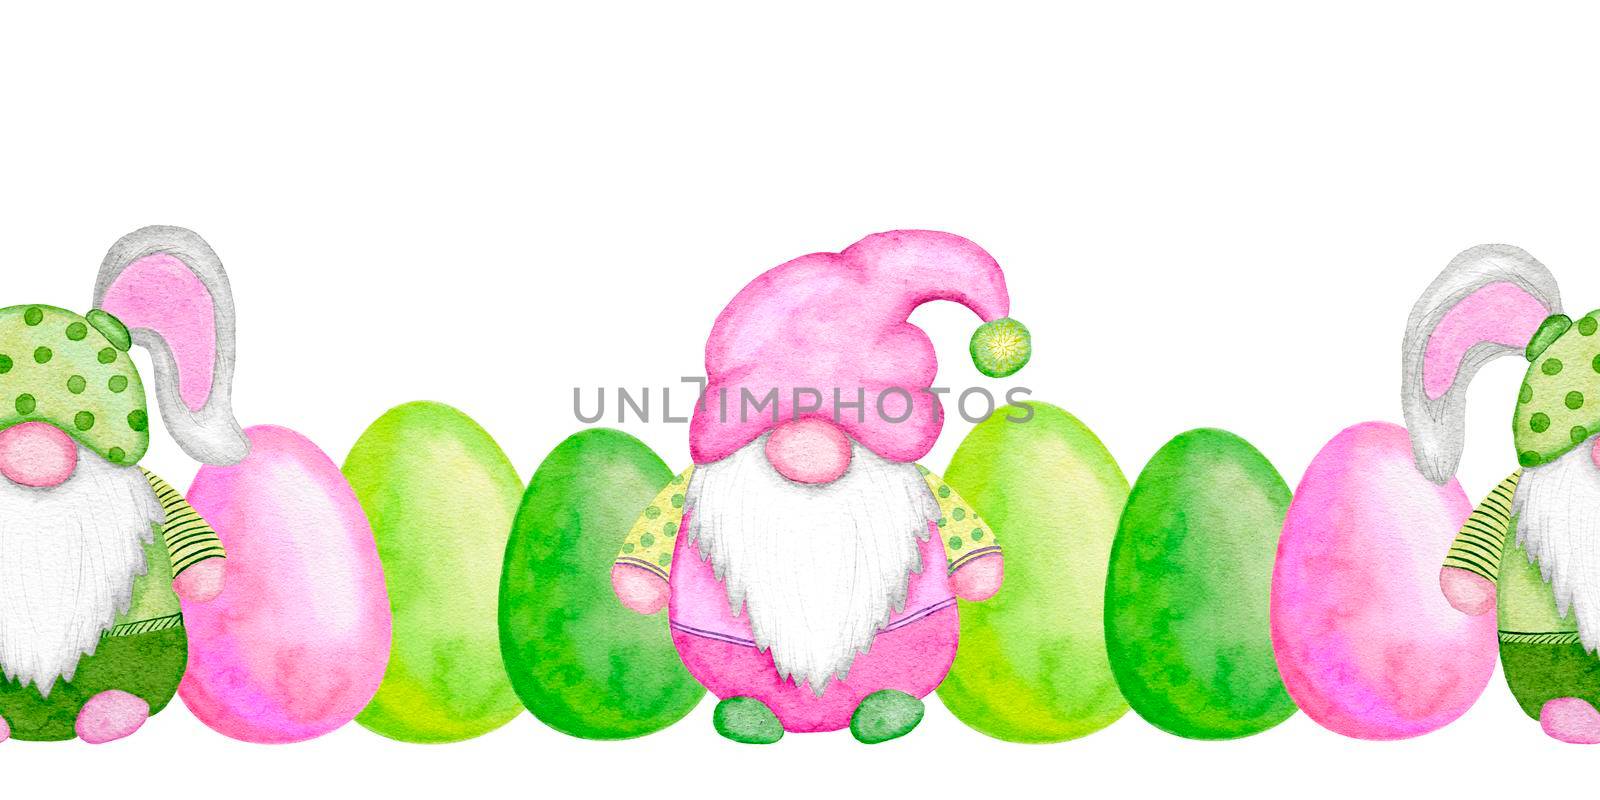 Seamless watercolor hand drawn horizontal borders with Easter eggs gnomes, green pink flowers cartoon design. April spring print with bright funny elements for Easter cards invitations